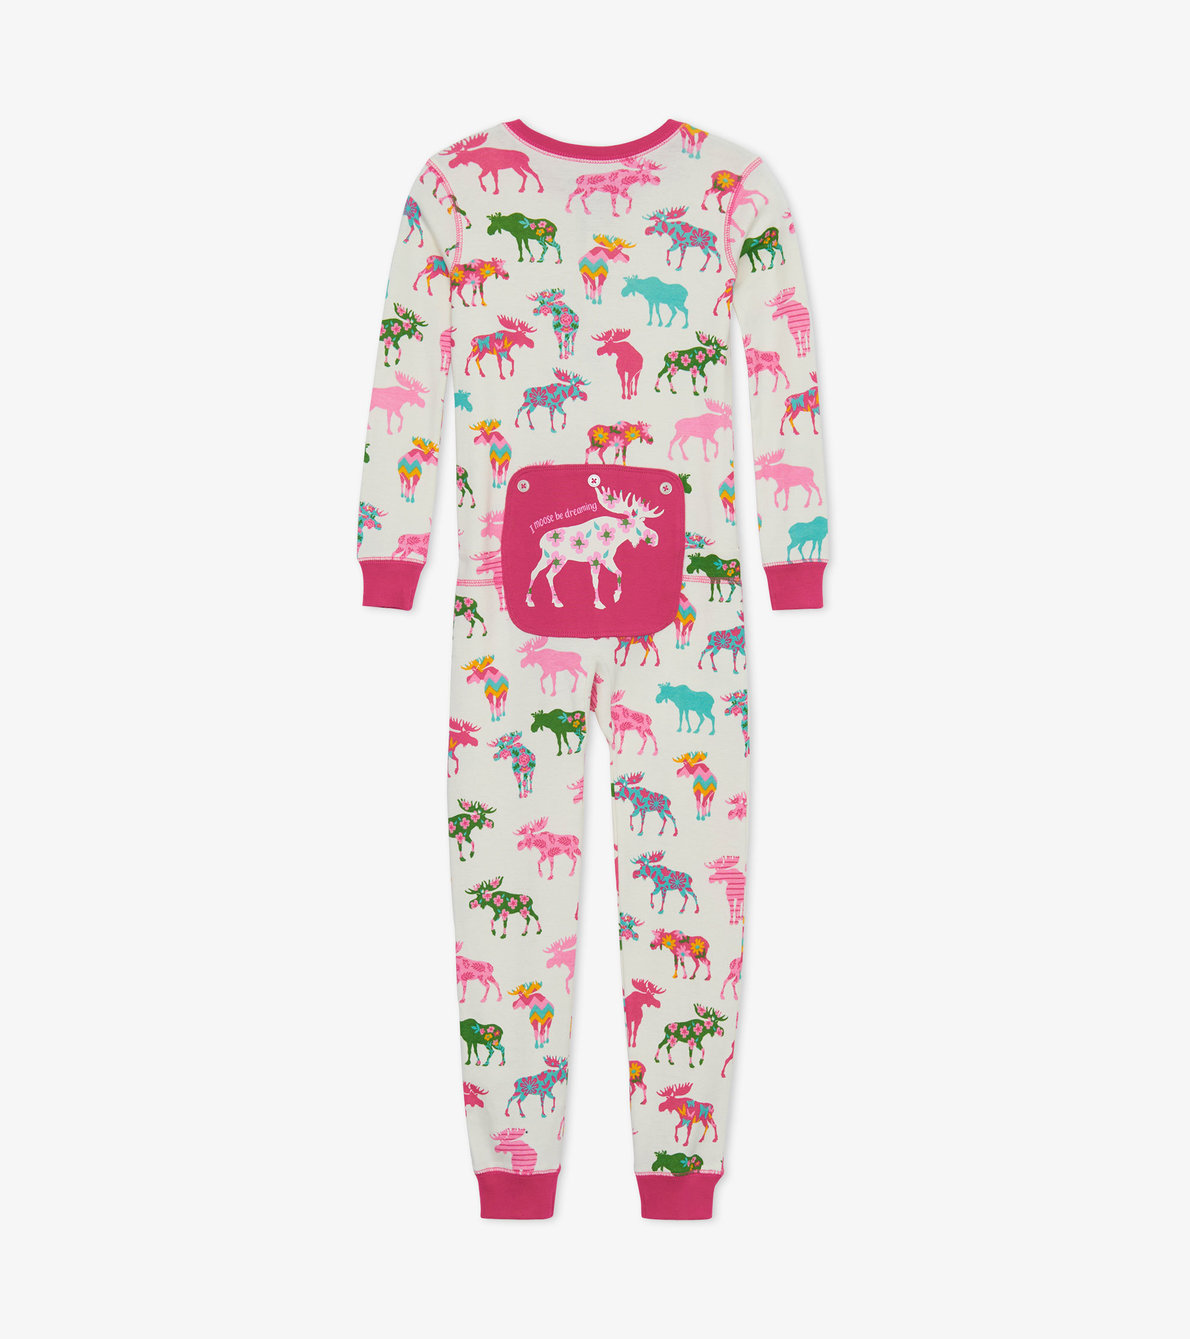 View larger image of Patterned Moose Kids Union Suit